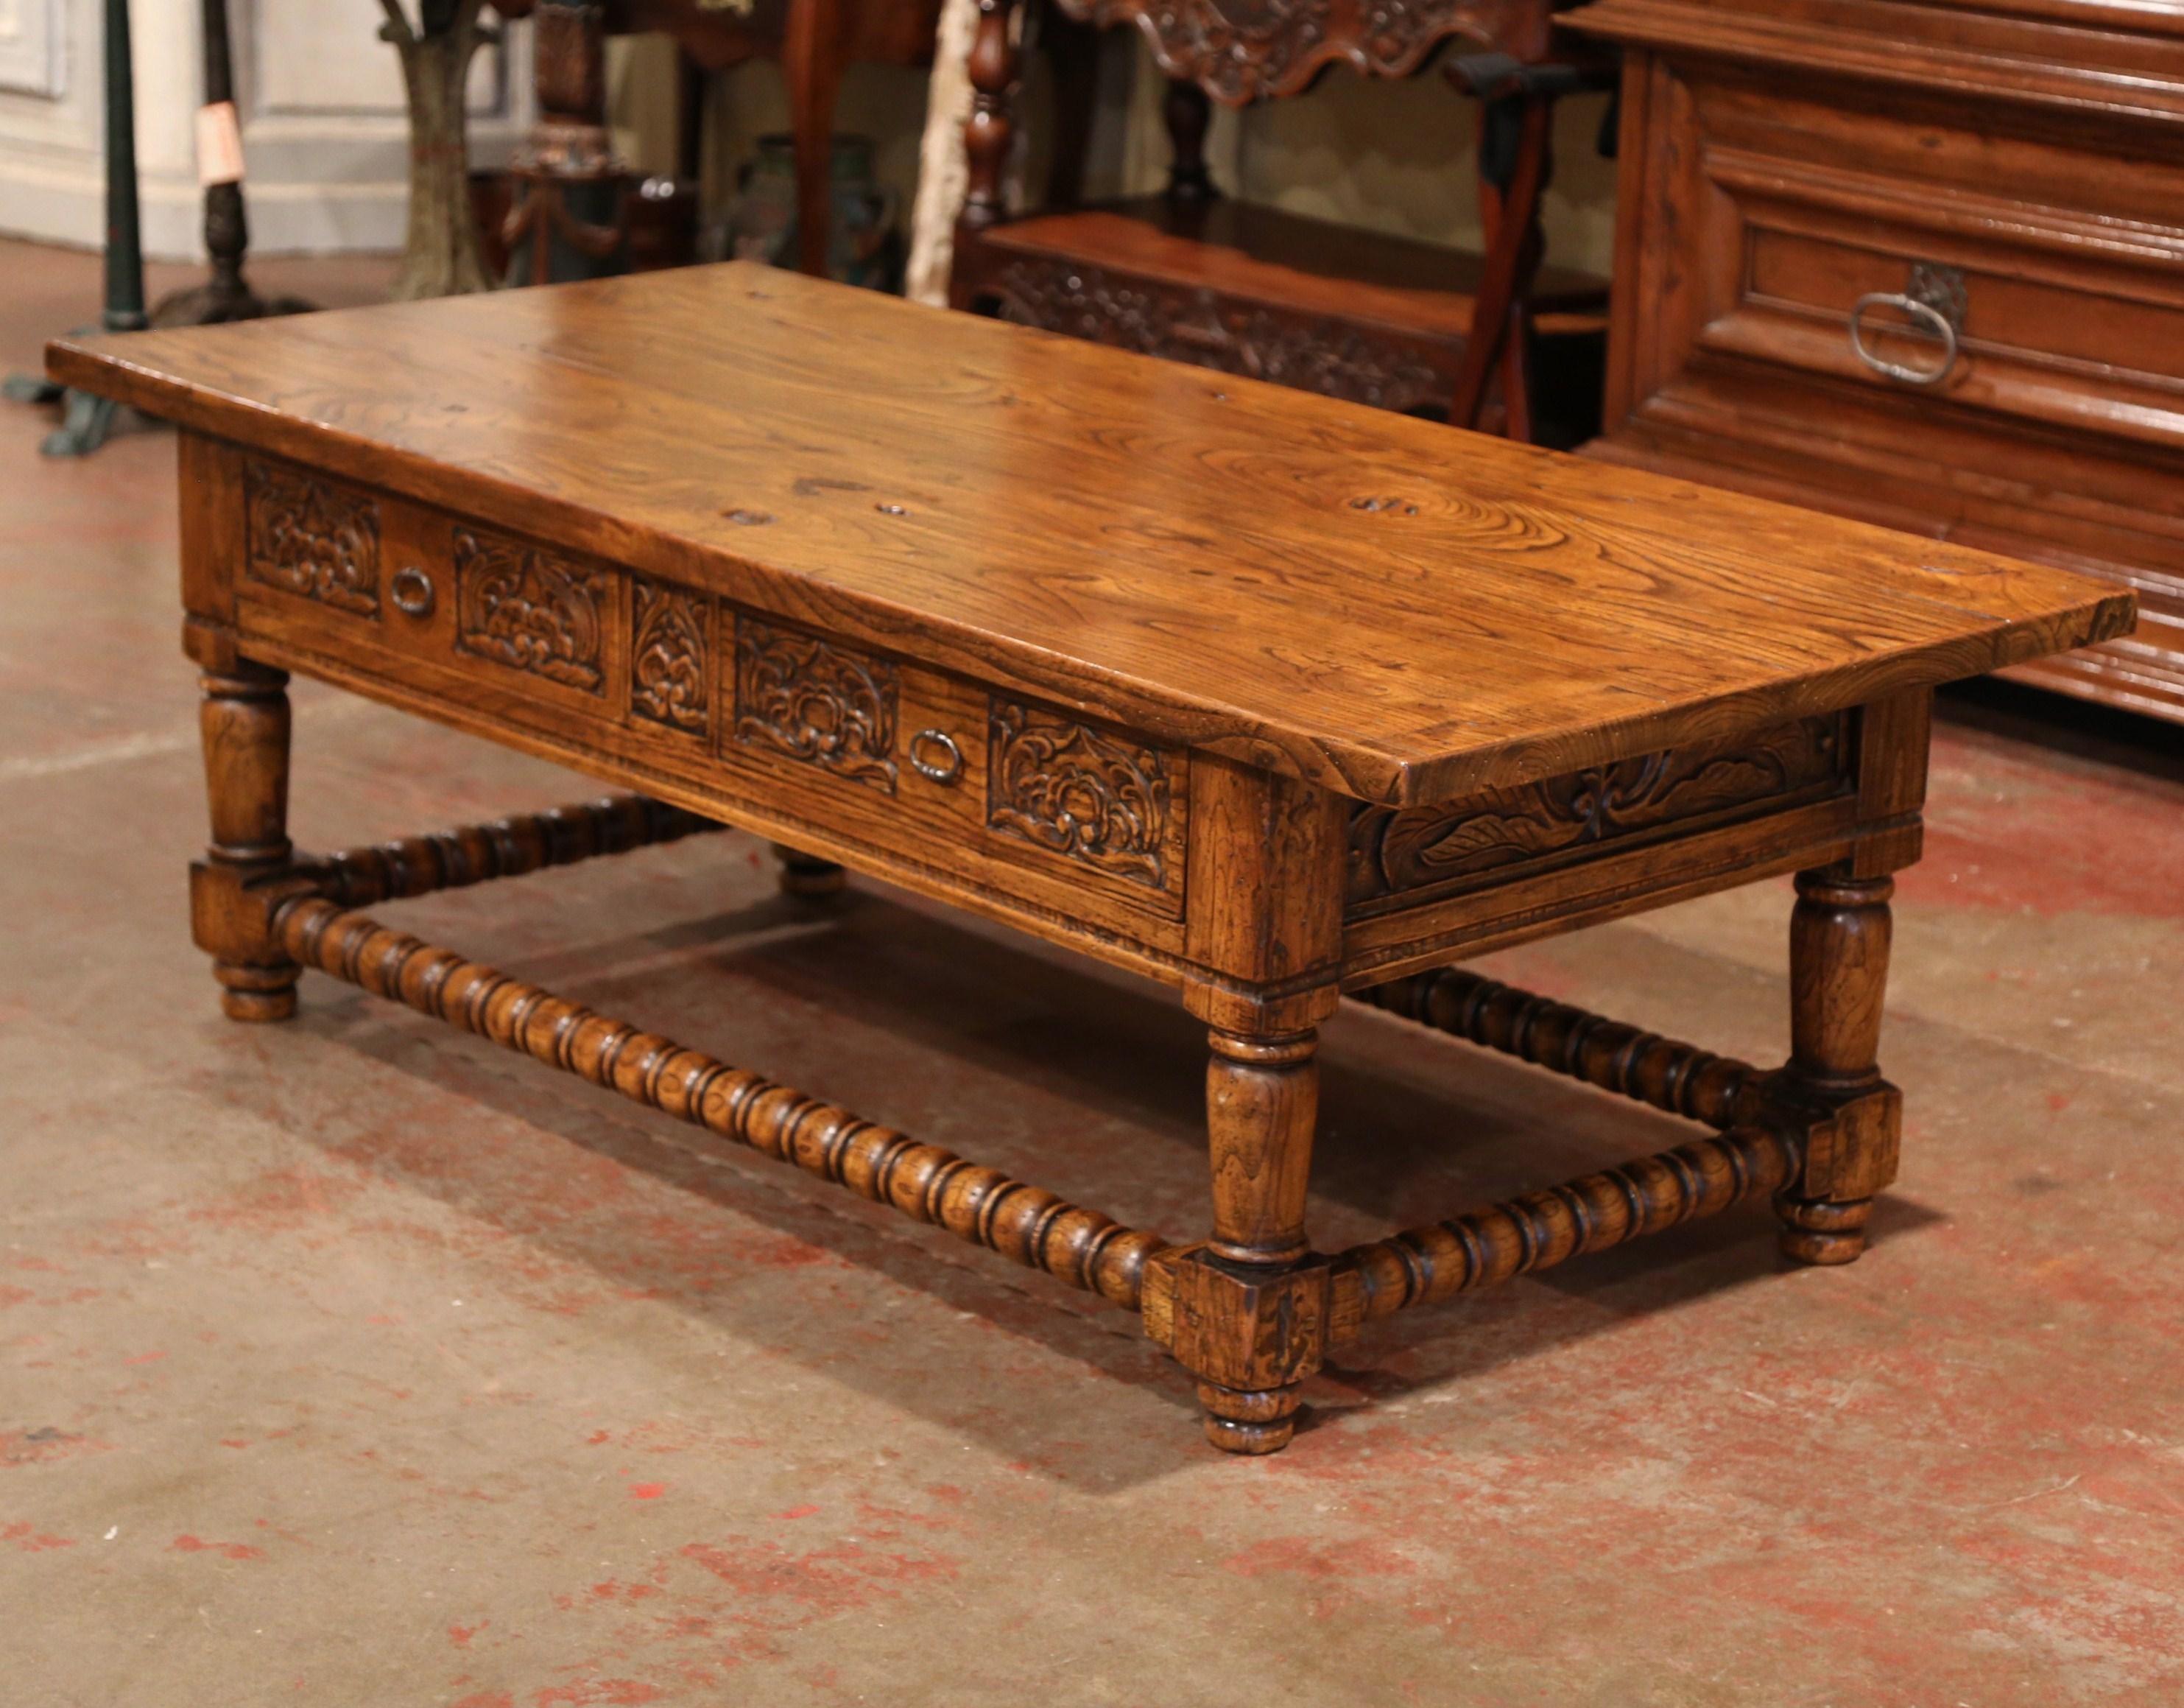 This elegant, chestnut antique cut down table was crafted in the Pyrenees, the southern mountains of France, circa 1920. Intricately carved on the front and sides, this cocktail table features four thick turned legs, attached at the base with a